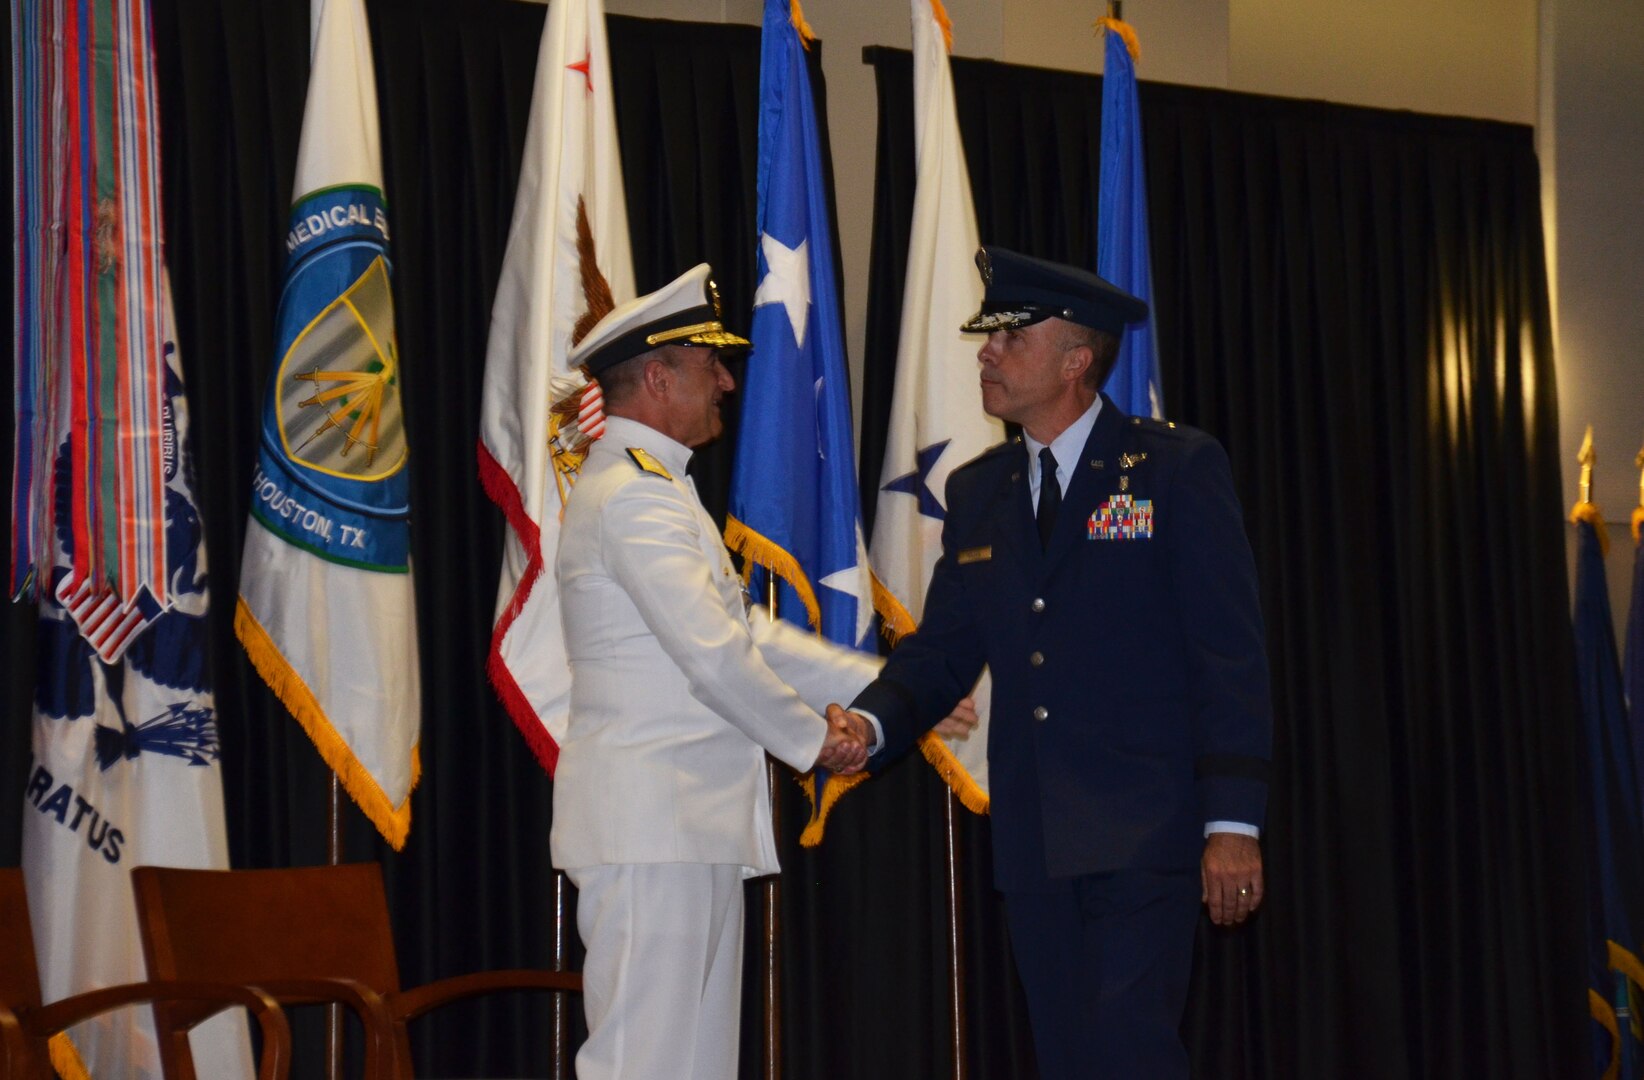 Rear Adm. William Roberts congratulates Brig. Gen. Robert Miller on relieving him as the new Medical Education and Training Campus commandant during a Change of Commandant ceremony September 24. Miller is METC's first Air Force commandant, a position that also inherits the dual hat of Education & Training (E&T) director for  the new Defense Health Agency.  Lt. Gen. Douglas Robb, Director of the Defense Health Agency, presided over the ceremony while the Honorable Dr. Jonathan Woodson, Assistant Secretary of Defense for Health Affairs, served as guest speaker 
(Photo by Lisa Braun)
